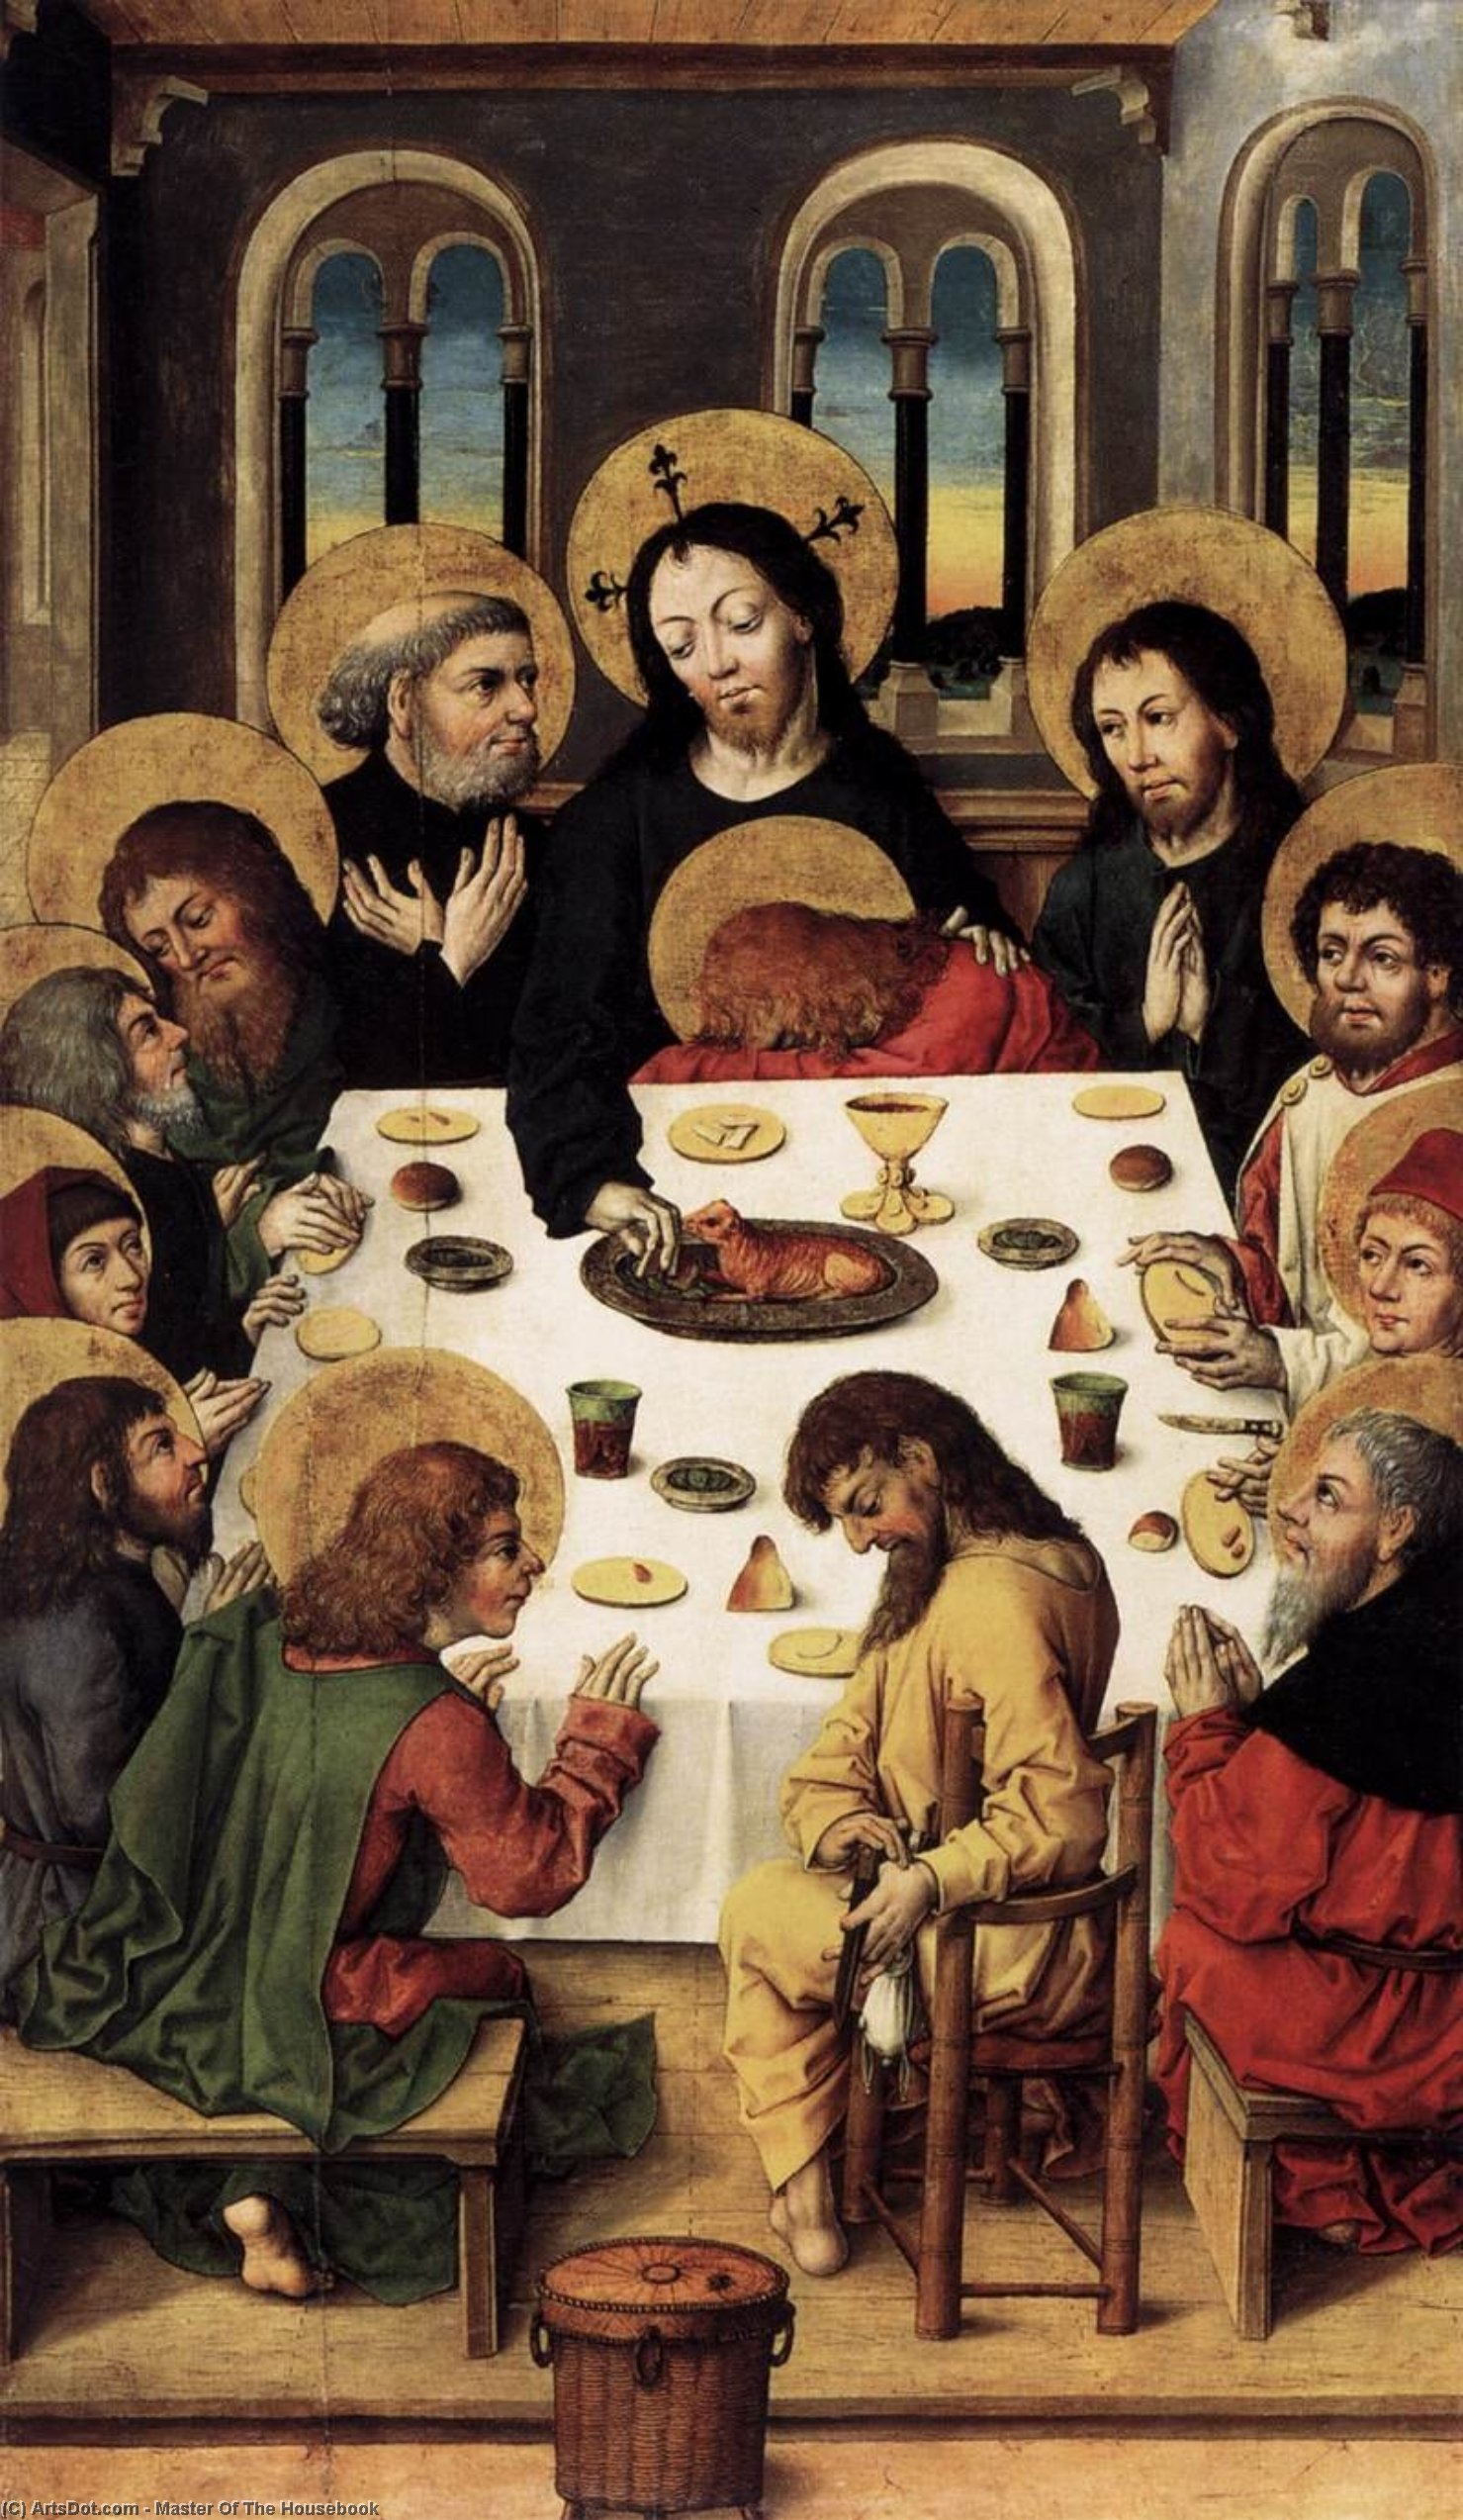 The Last Supper, 1475 by Master Of The Housebook Master Of The Housebook | ArtsDot.com